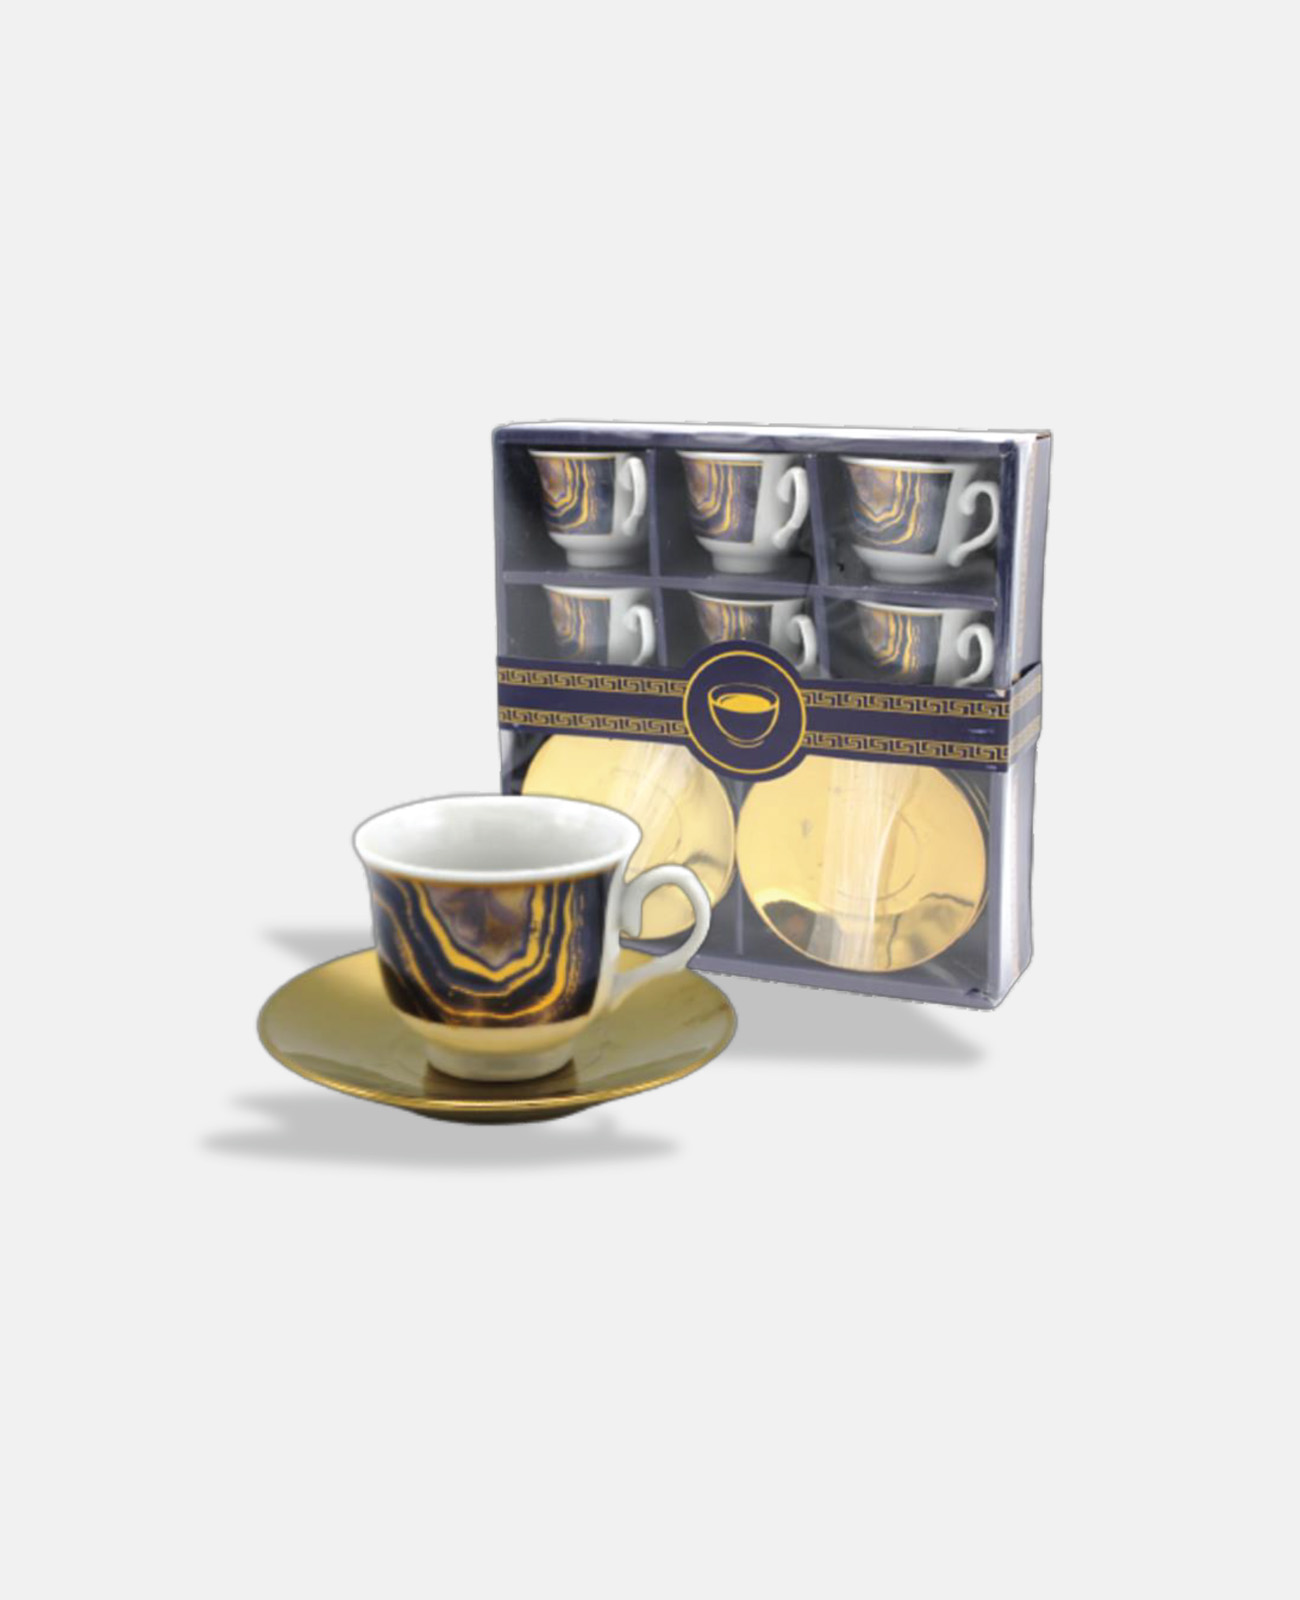 Black and Gold Printed White Porcelain Coffee Cups Set - 6 Pieces/H 1-23